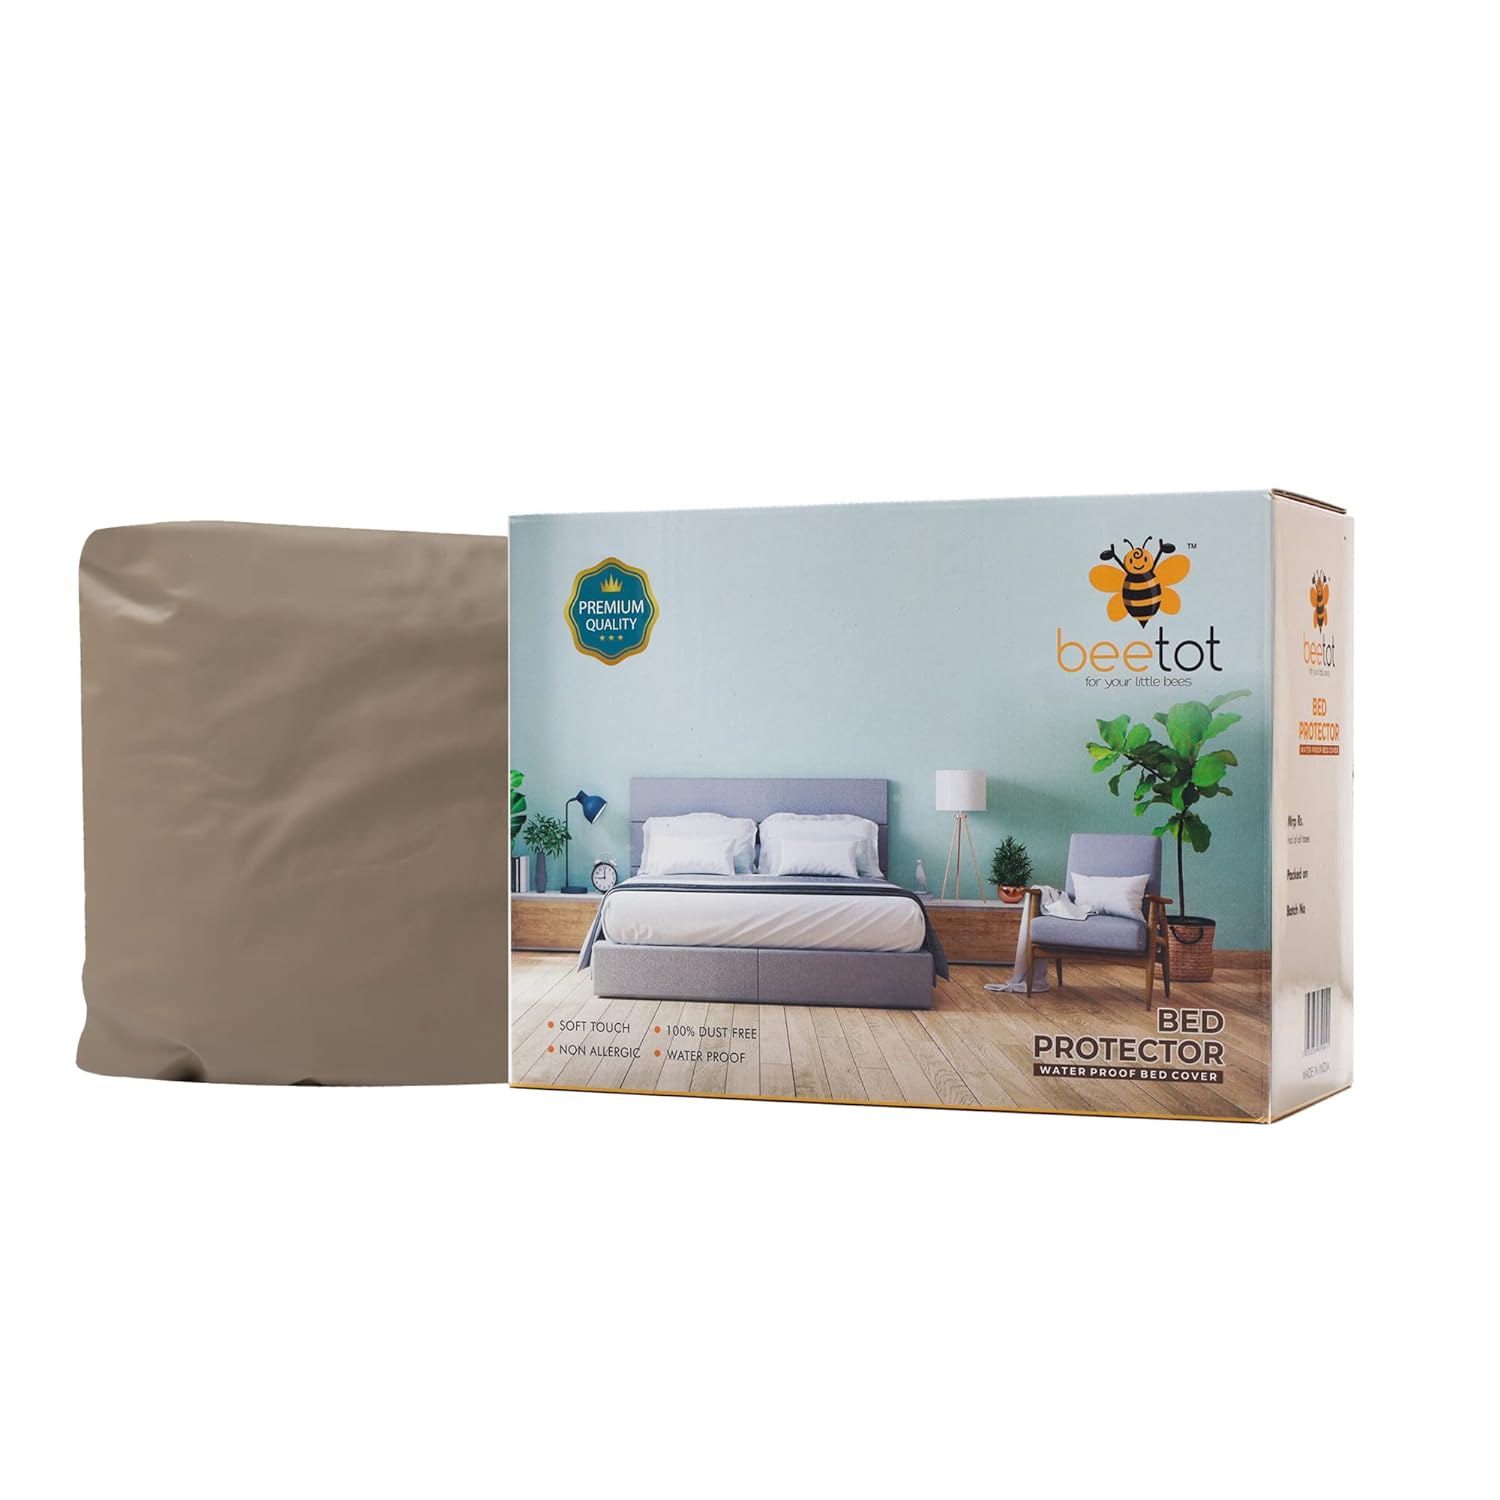 PVC Water Proof and Dust Proof Double Bed Cover, Mattress Protector, Non-Toxic Bed Protector, Mattress Cover (Gold)